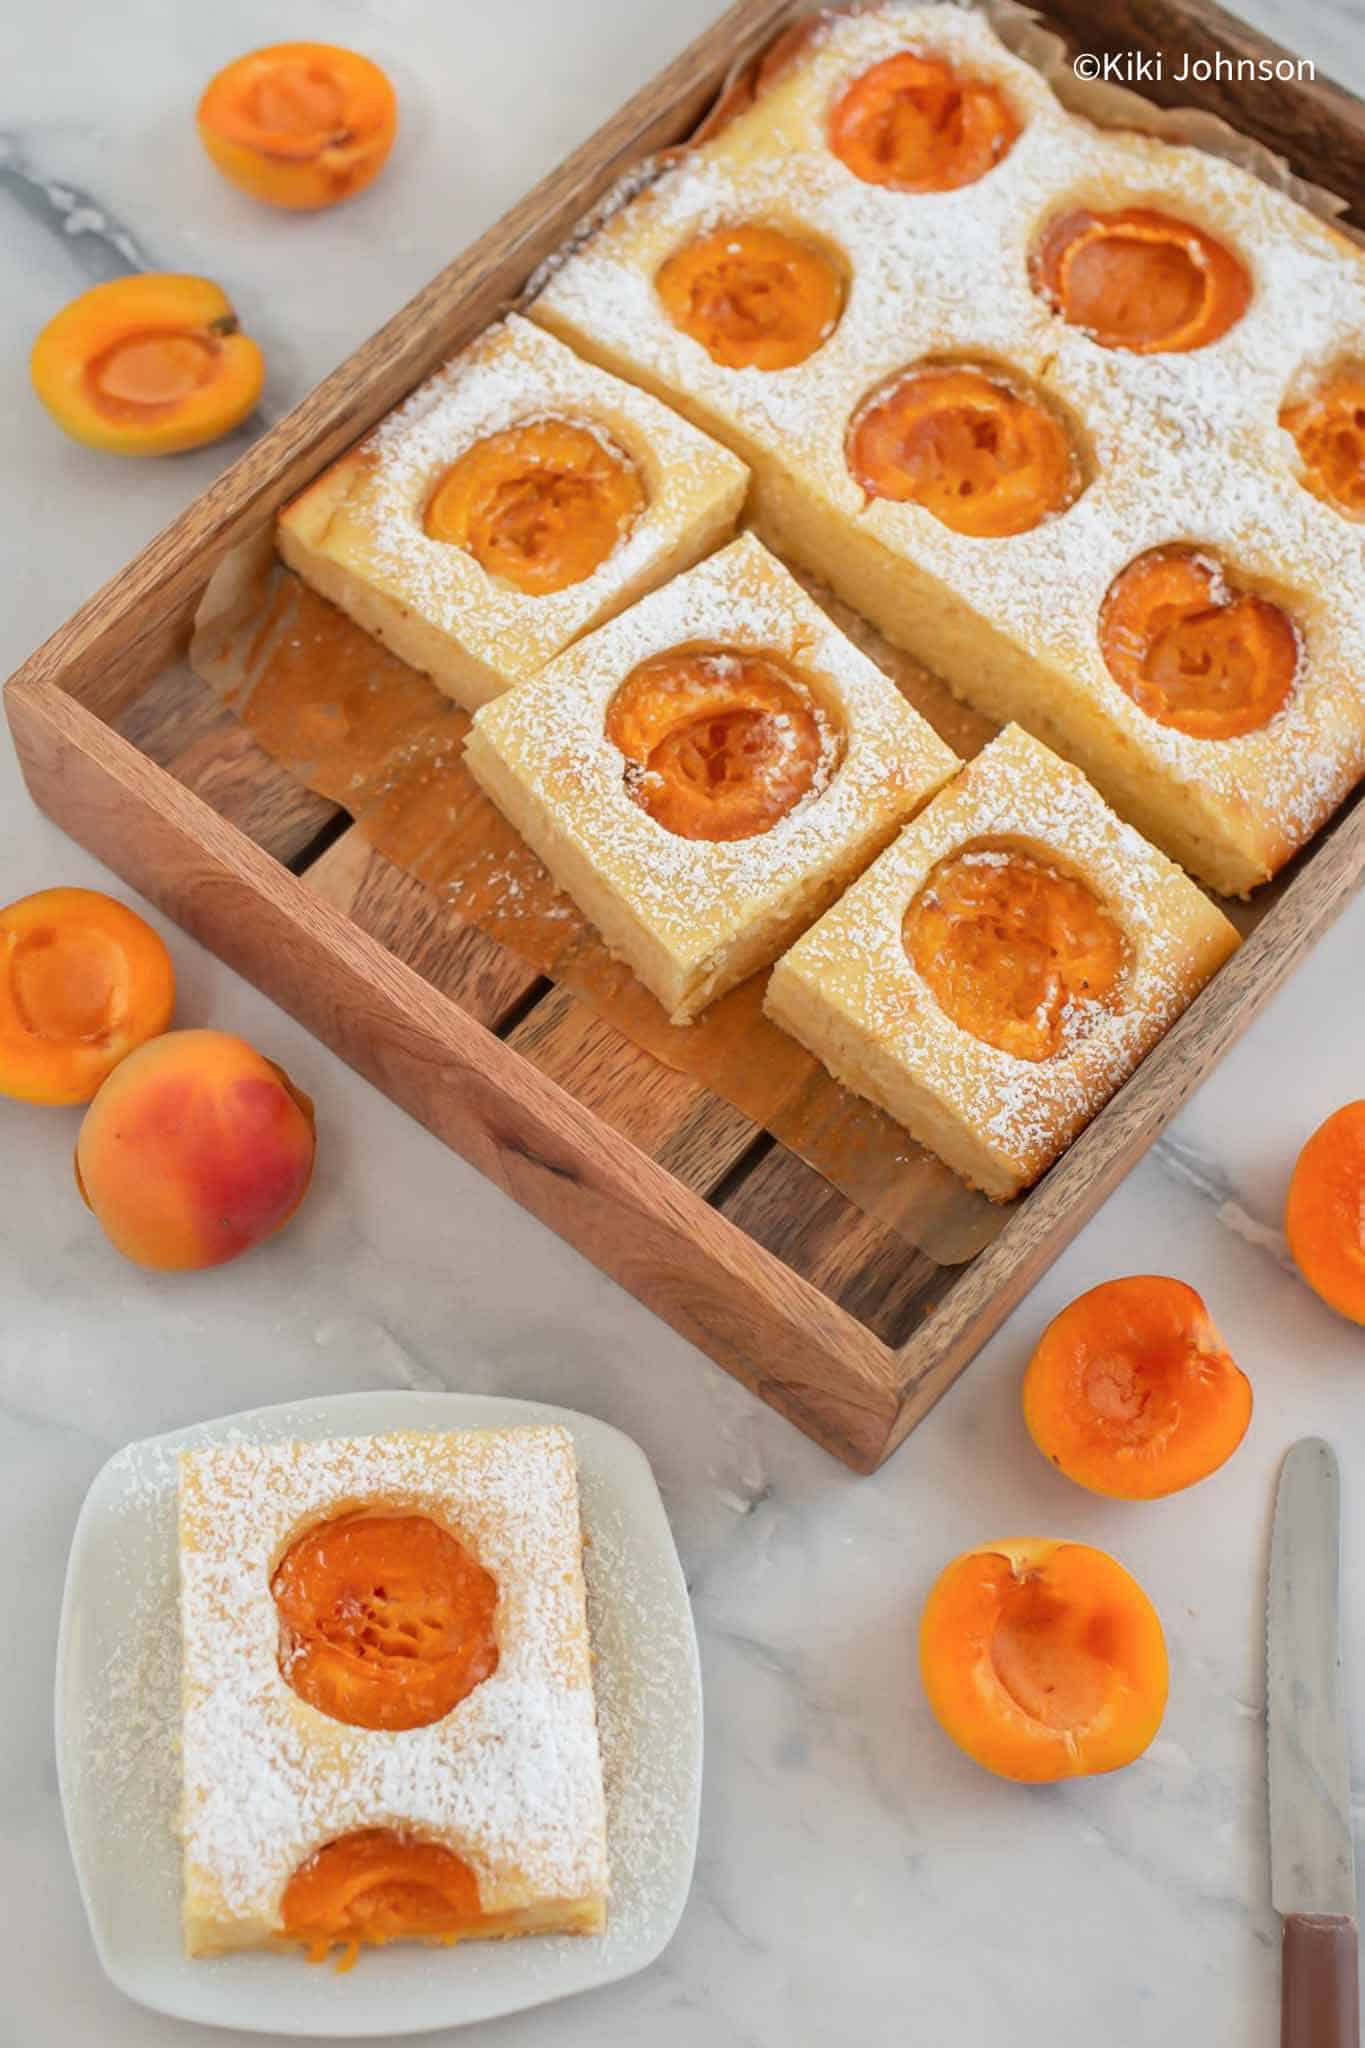 German fresh apricot sponge cake baked on a sheet pan and cut into slices.